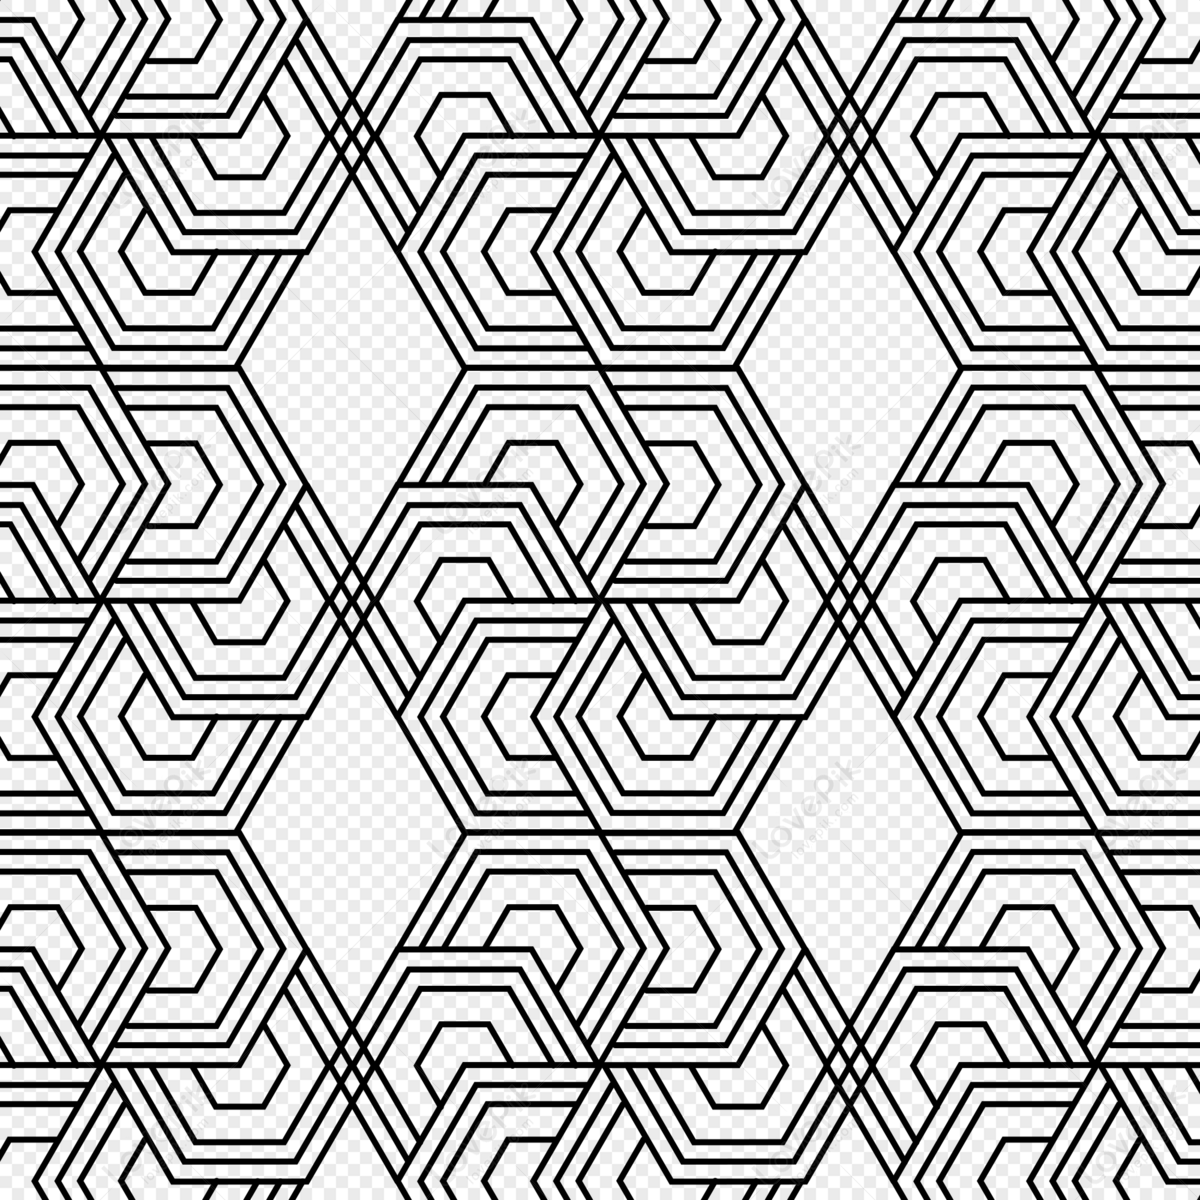 Geometric Pattern PNG Transparent Background And Clipart Image For Free  Download - Lovepik